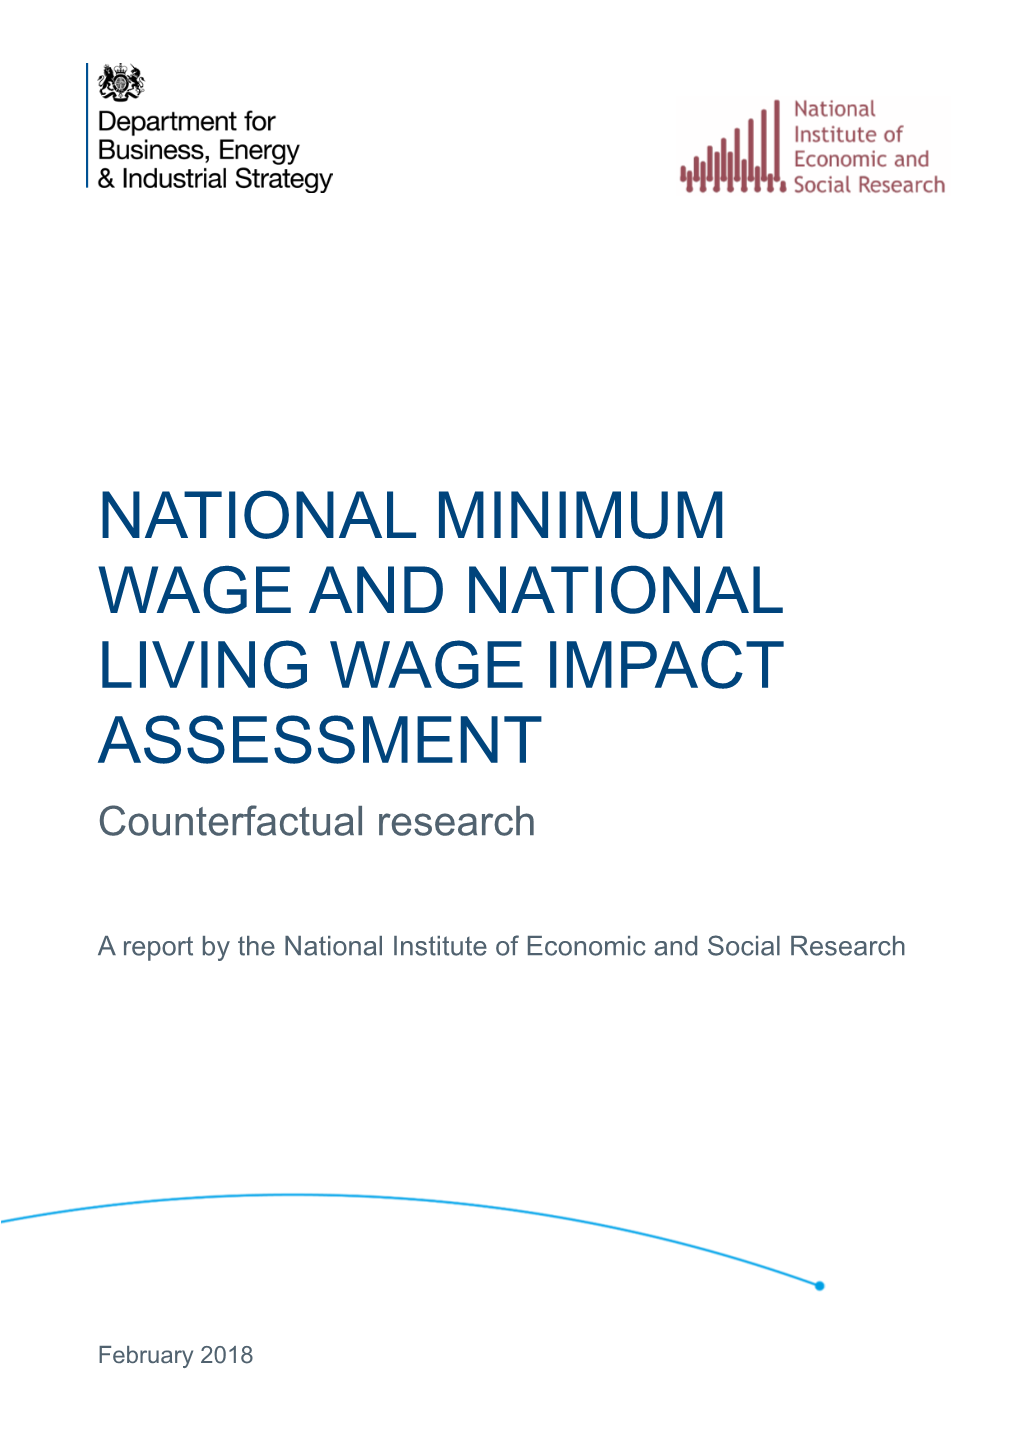 NATIONAL MINIMUM WAGE and NATIONAL LIVING WAGE IMPACT ASSESSMENT Counterfactual Research